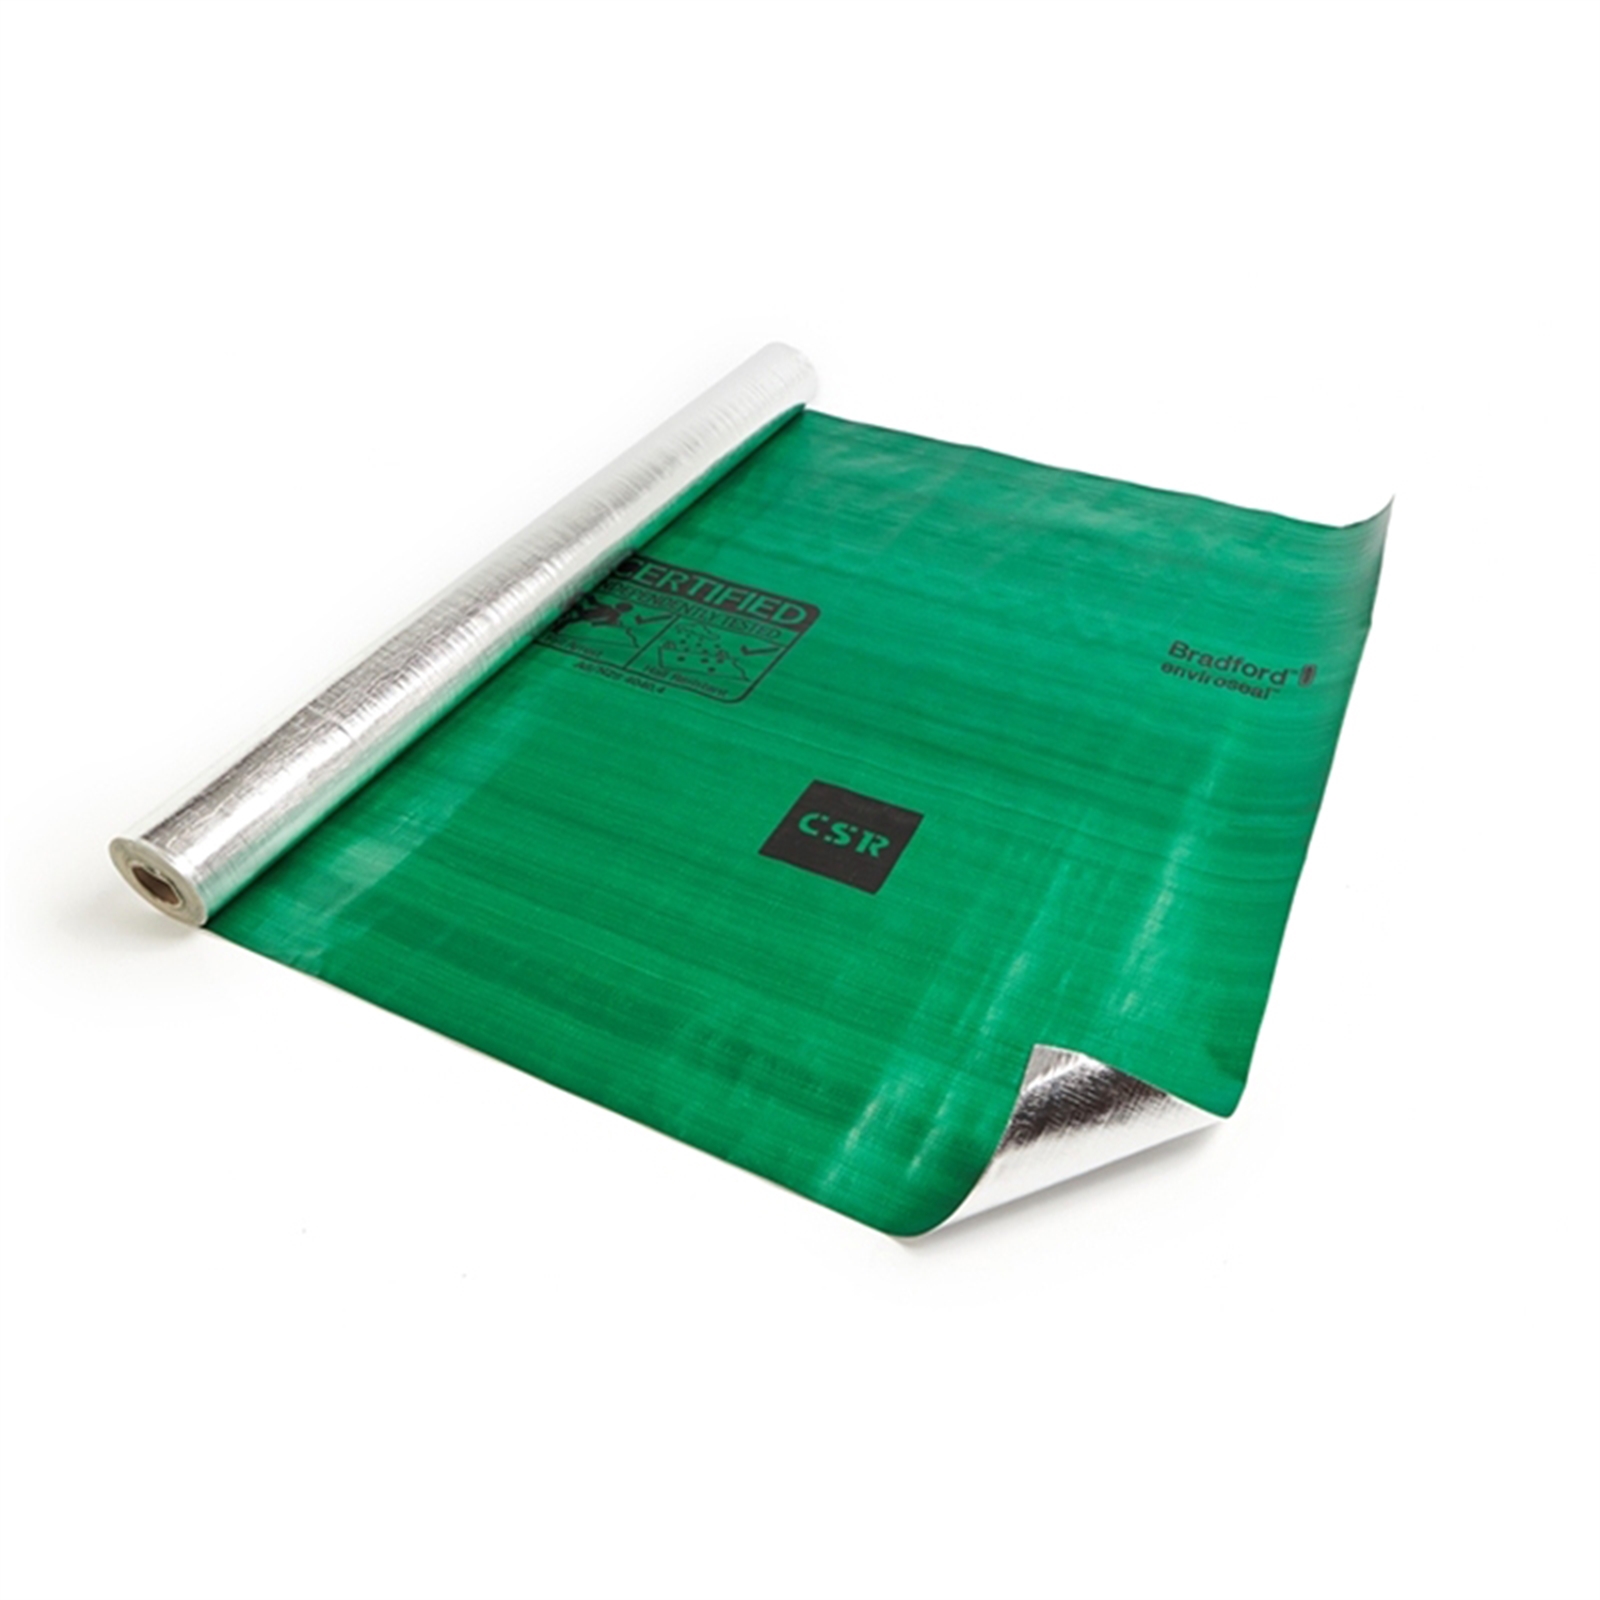 Bradford 1.5 x 30m Thermoseal Roof Tile Safety Extra Heavy Duty Membrane